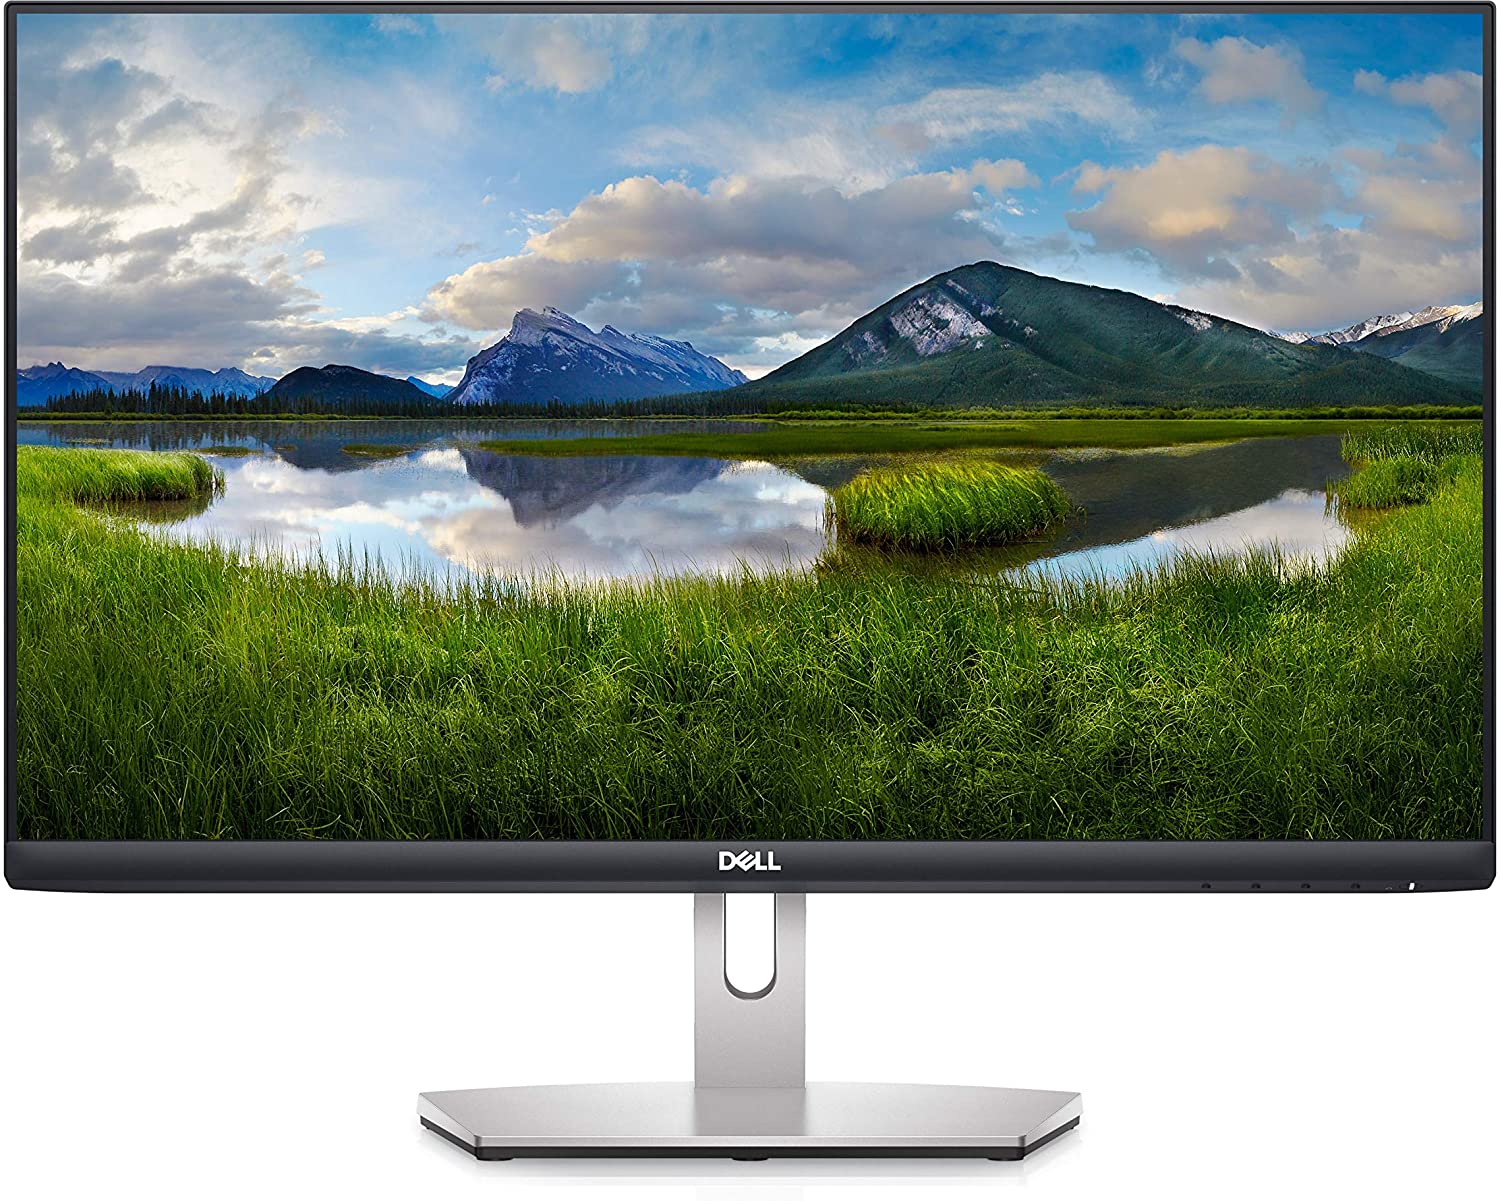   DELL S2421HN 24 INCH MONITOR WITH 2 HDMI PORTS